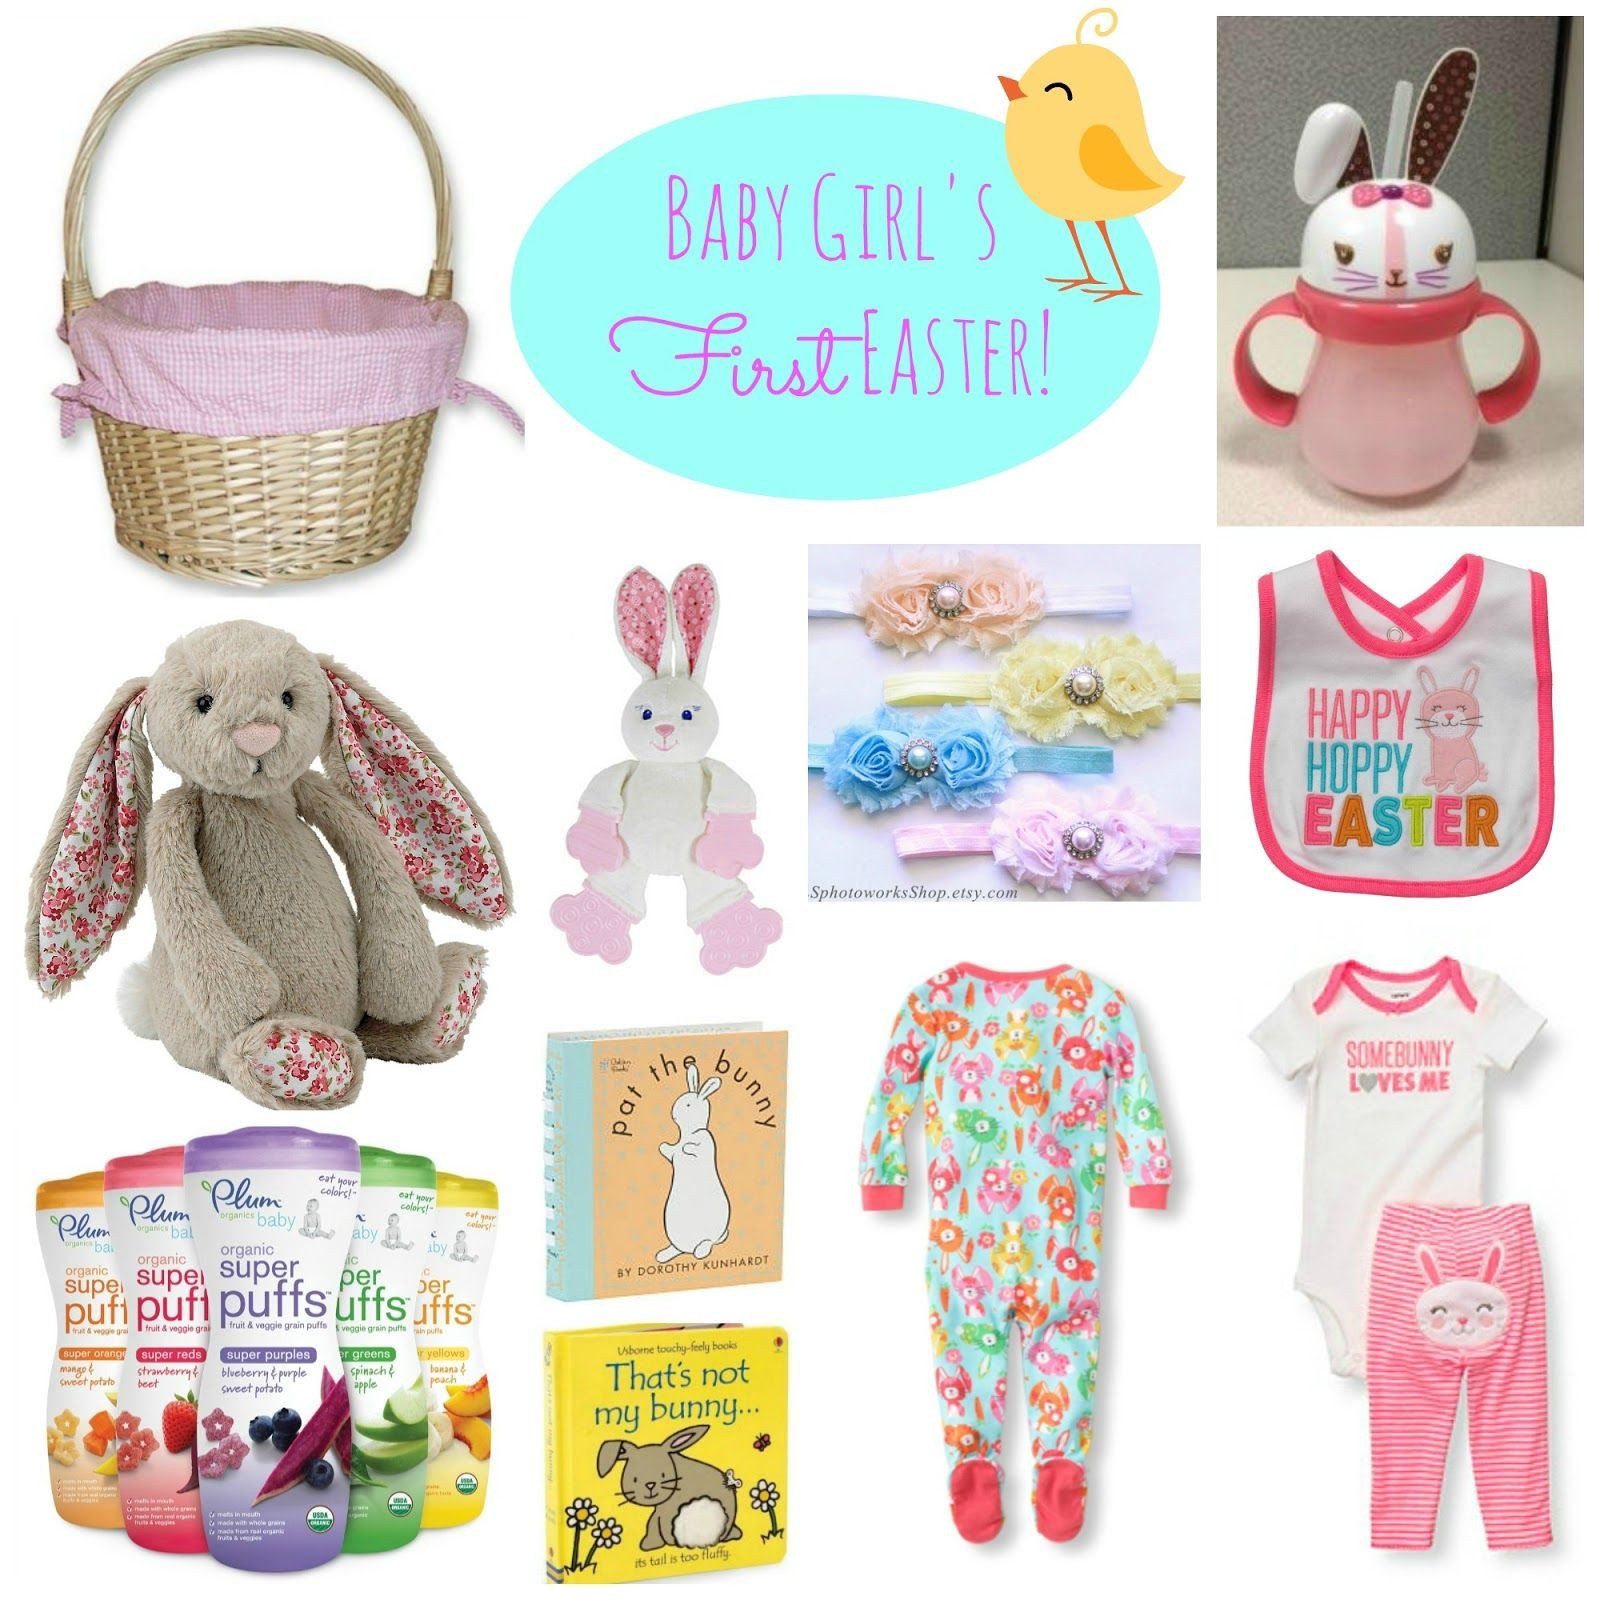 Gift Ideas For Baby'S First Easter
 Baby Girl s First Easter Basket Ideas with links for